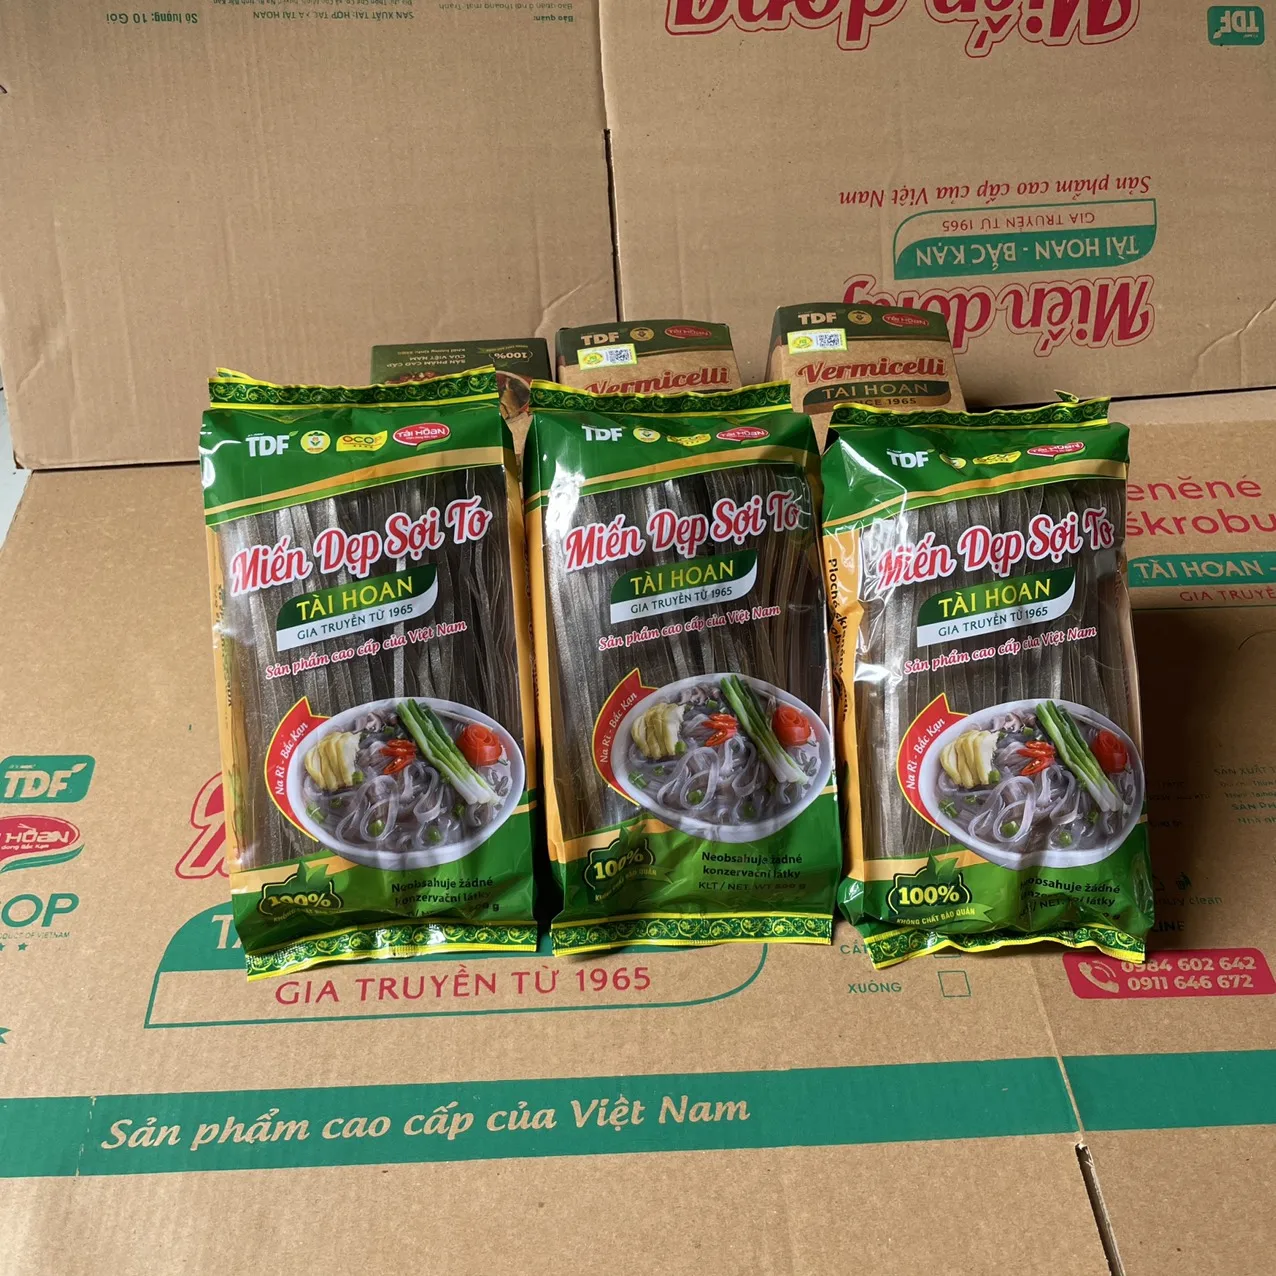 TAI HOAN Brand Name Traditional Flat Vermicelli/ Dried Noodles Bag 500 grams High Quality From Vietnam